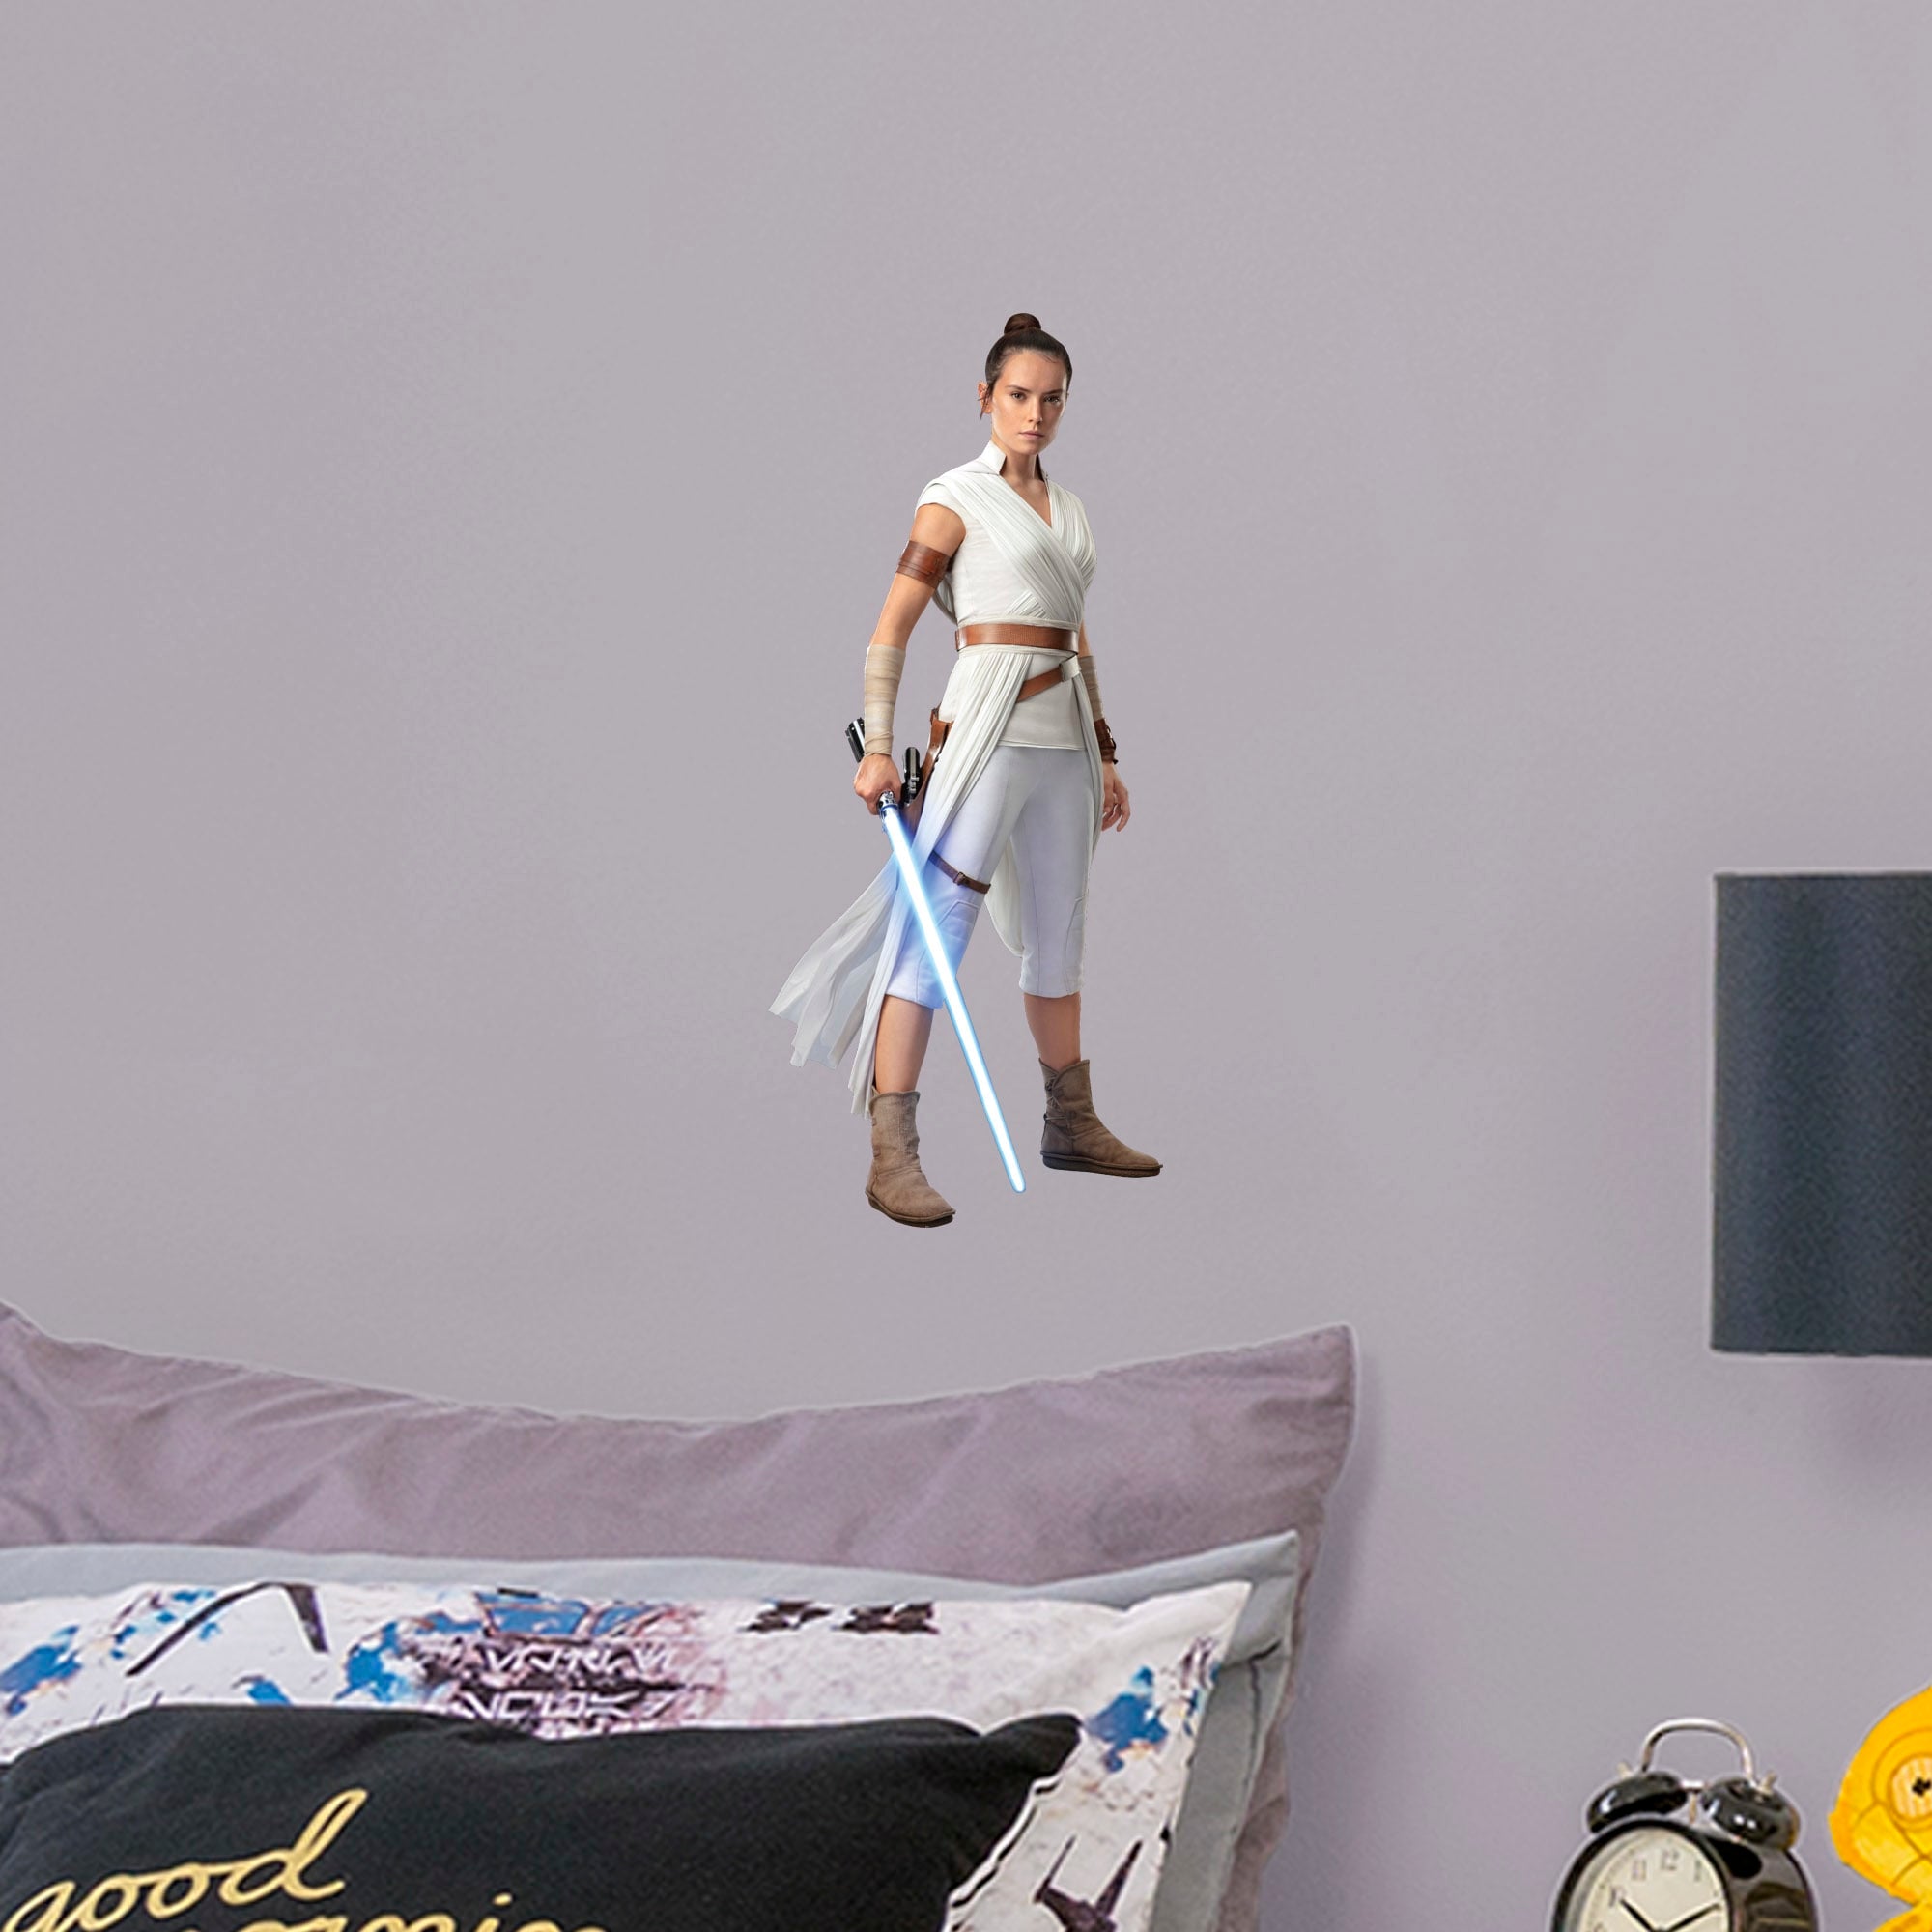 Rey - Officially Licensed Removable Wall Decal Large by Fathead | Vinyl